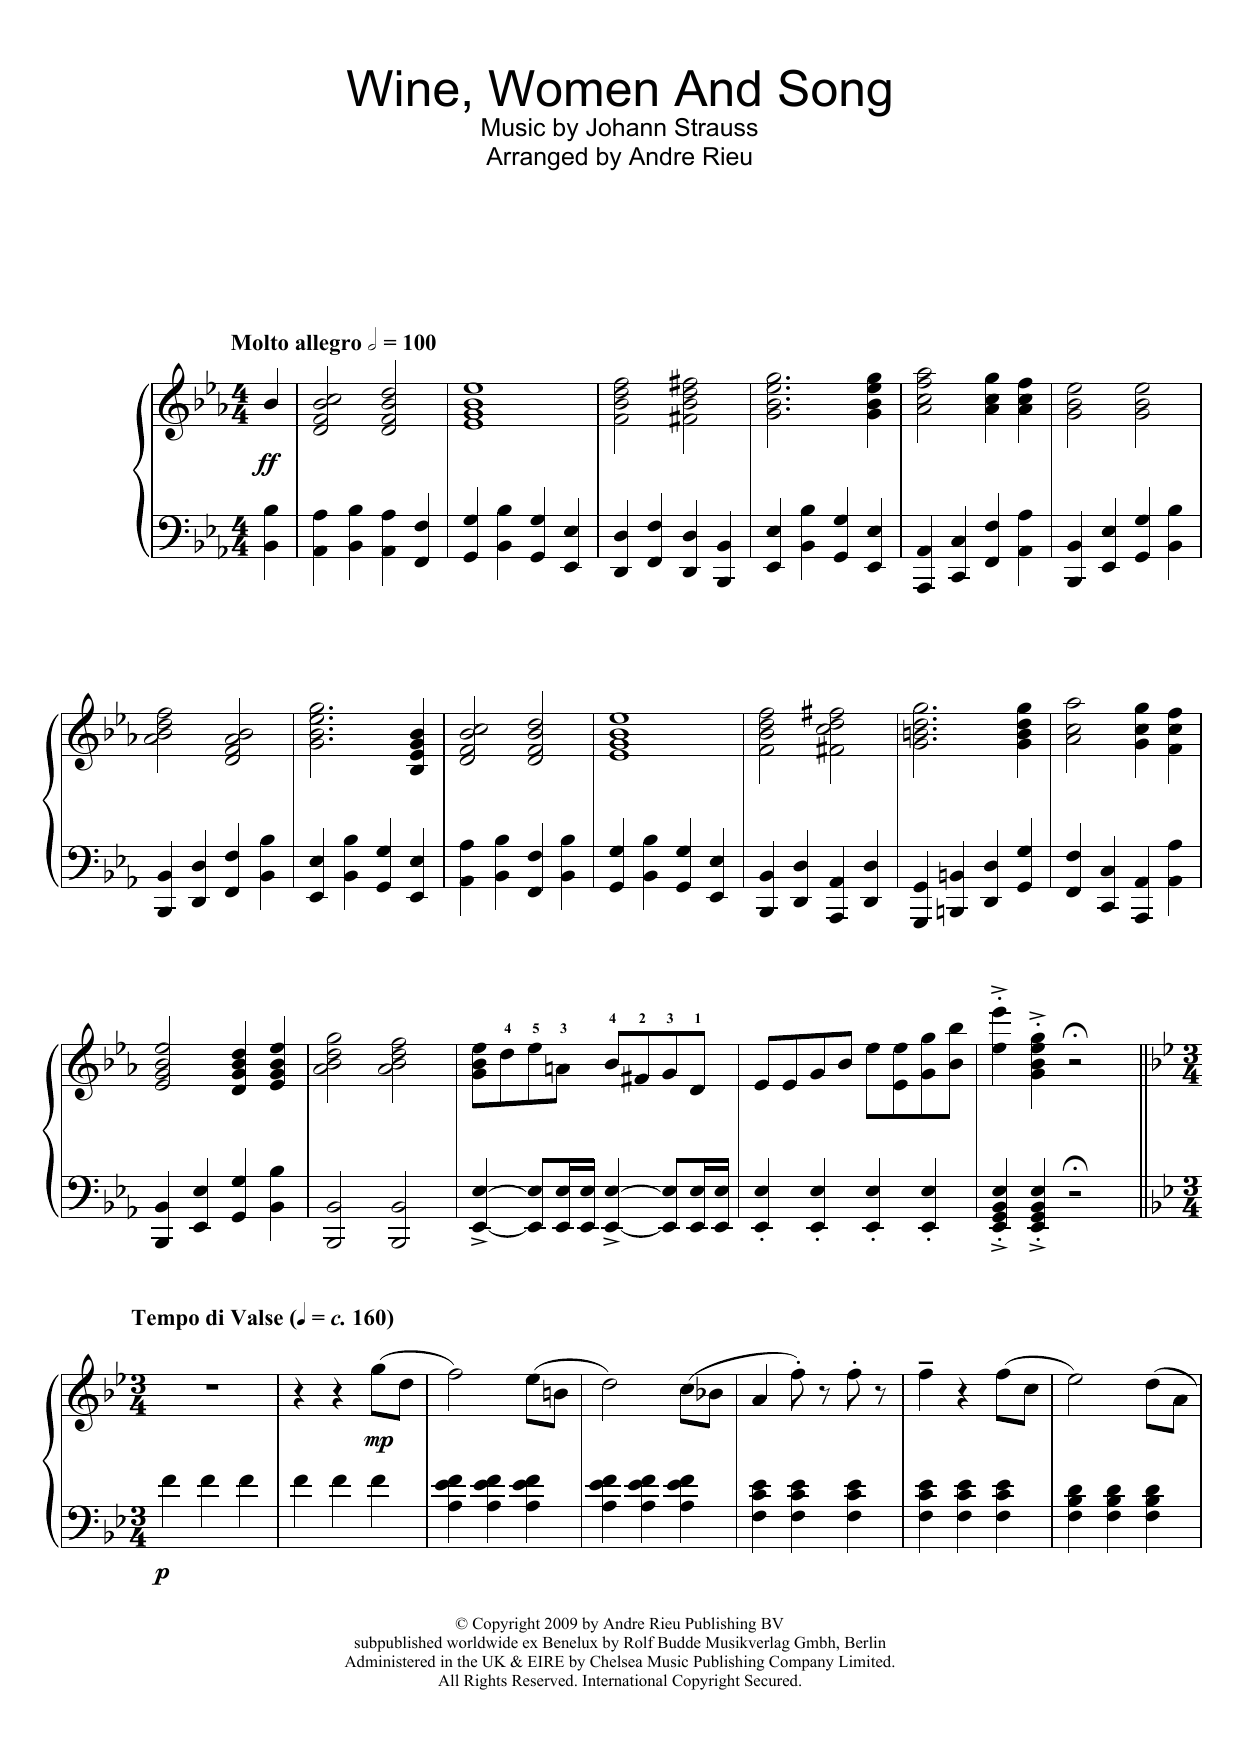 Andre Rieu Wine, Women And Song sheet music notes and chords. Download Printable PDF.